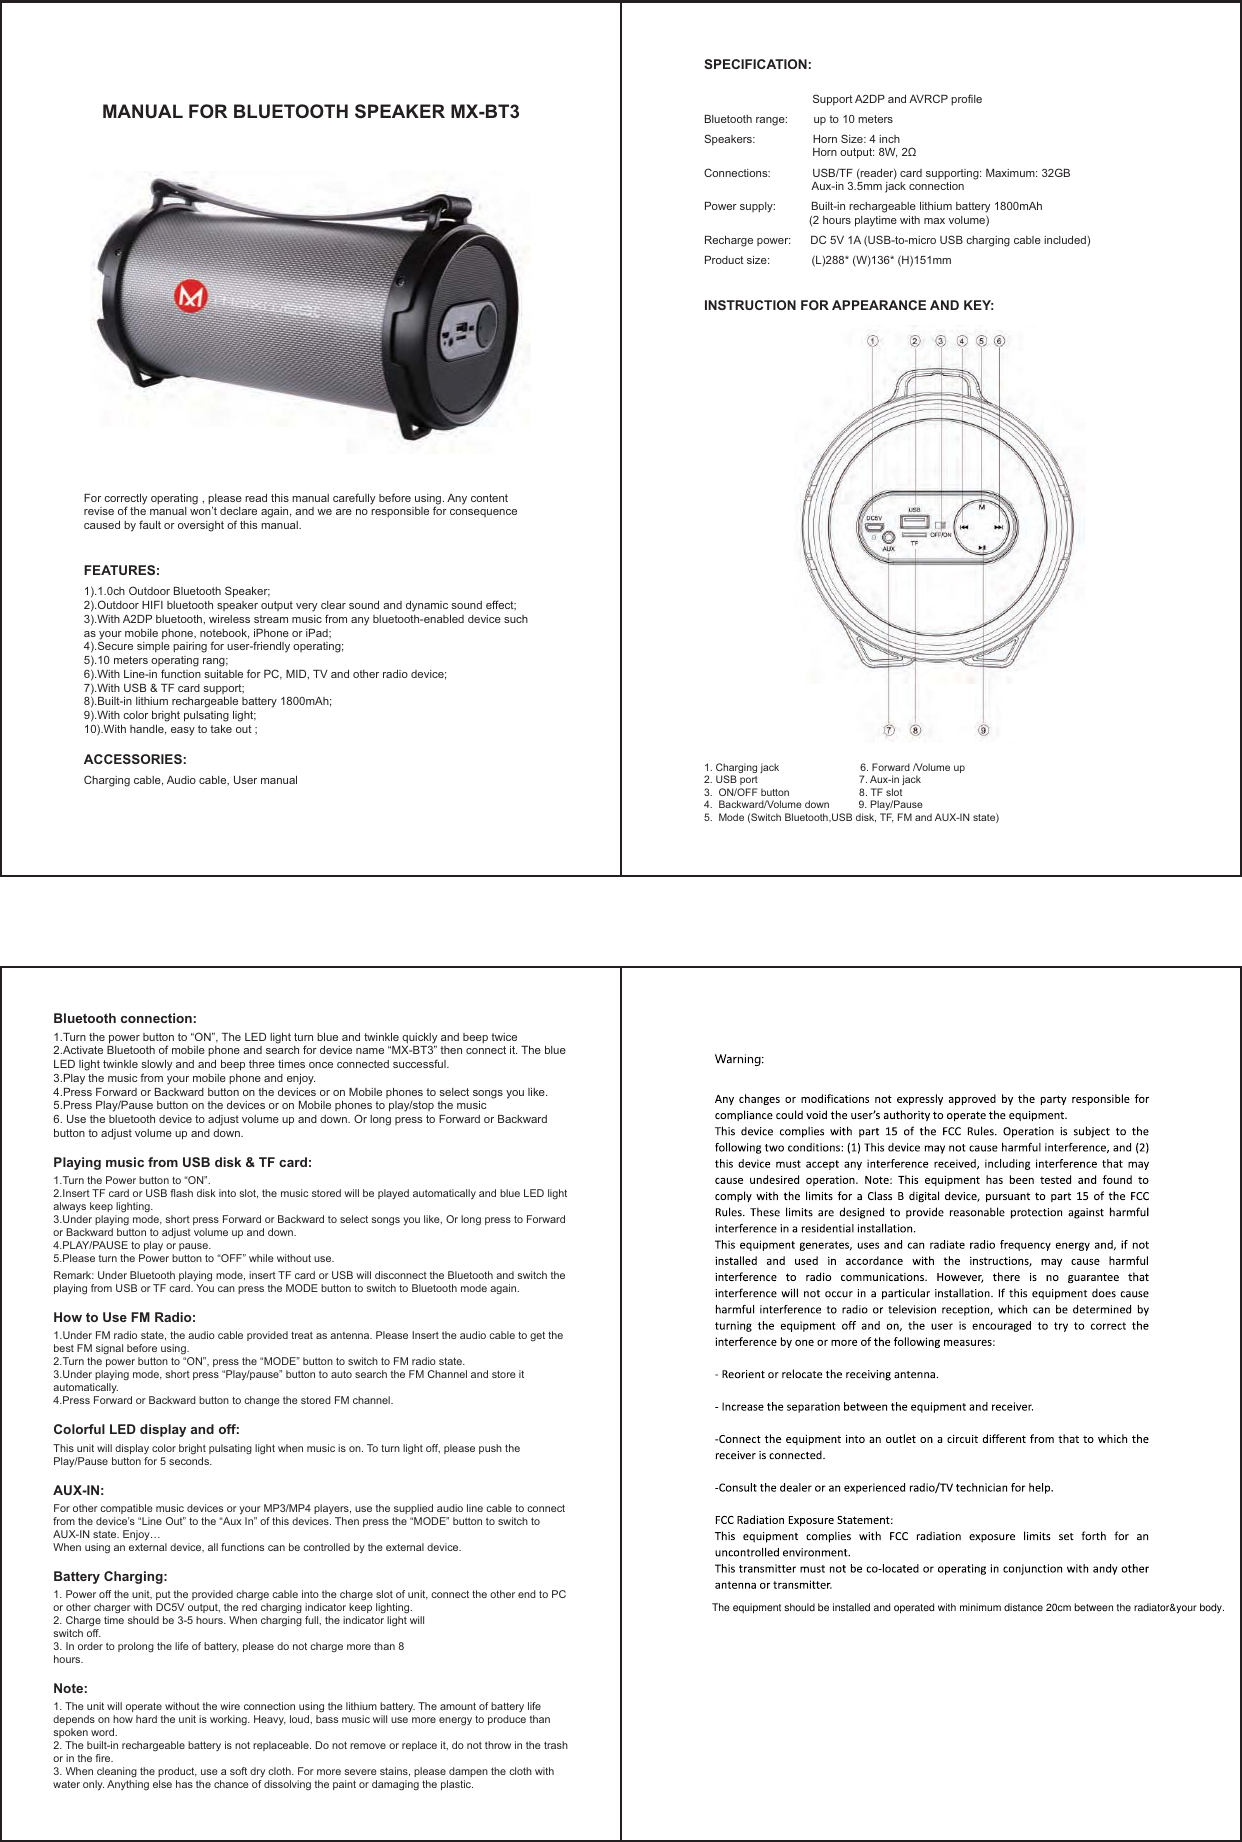 MANUAL FOR BLUETOOTH SPEAKER MX-BT3For correctly operating , please read this manual carefully before using. Any content revise of the manual won’t declare again, and we are no responsible for consequence caused by fault or oversight of this manual.FEATURES:1).1.0ch Outdoor Bluetooth Speaker;2).Outdoor HIFI bluetooth speaker output very clear sound and dynamic sound effect;3).With A2DP bluetooth, wireless stream music from any bluetooth-enabled device such as your mobile phone, notebook, iPhone or iPad;4).Secure simple pairing for user-friendly operating;5).10 meters operating rang;6).With Line-in function suitable for PC, MID, TV and other radio device;                                                                7).With USB &amp; TF card support; 8).Built-in lithium rechargeable battery 1800mAh;9).With color bright pulsating light;10).With handle, easy to take out ; ACCESSORIES:Charging cable, Audio cable, User manualBluetooth connection:1.Turn the power button to “ON”, The LED light turn blue and twinkle quickly and beep twice 2.Activate Bluetooth of mobile phone and search for device name “MX-BT3” then connect it. The blue LED light twinkle slowly and and beep three times once connected successful.3.Play the music from your mobile phone and enjoy.4.Press Forward or Backward button on the devices or on Mobile phones to select songs you like. 5.Press Play/Pause button on the devices or on Mobile phones to play/stop the music6. Use the bluetooth device to adjust volume up and down. Or long press to Forward or Backward button to adjust volume up and down.Playing music from USB disk &amp; TF card:1.Turn the Power button to “ON”.2.Insert TF card or USB flash disk into slot, the music stored will be played automatically and blue LED light always keep lighting.3.Under playing mode, short press Forward or Backward to select songs you like, Or long press to Forward or Backward button to adjust volume up and down.4.PLAY/PAUSE to play or pause.5.Please turn the Power button to “OFF” while without use.Remark: Under Bluetooth playing mode, insert TF card or USB will disconnect the Bluetooth and switch the playing from USB or TF card. You can press the MODE button to switch to Bluetooth mode again.How to Use FM Radio:1.Under FM radio state, the audio cable provided treat as antenna. Please Insert the audio cable to get the best FM signal before using.2.Turn the power button to “ON”, press the “MODE” button to switch to FM radio state. 3.Under playing mode, short press “Play/pause” button to auto search the FM Channel and store it automatically.4.Press Forward or Backward button to change the stored FM channel.Colorful LED display and off: This unit will display color bright pulsating light when music is on. To turn light off, please push the Play/Pause button for 5 seconds.AUX-IN:For other compatible music devices or your MP3/MP4 players, use the supplied audio line cable to connect from the device’s “Line Out” to the “Aux In” of this devices. Then press the “MODE” button to switch to AUX-IN state. Enjoy…When using an external device, all functions can be controlled by the external device.Battery Charging:1. Power off the unit, put the provided charge cable into the charge slot of unit, connect the other end to PC or other charger with DC5V output, the red charging indicator keep lighting.2. Charge time should be 3-5 hours. When charging full, the indicator light willswitch off.3. In order to prolong the life of battery, please do not charge more than 8hours.Note:1. The unit will operate without the wire connection using the lithium battery. The amount of battery life depends on how hard the unit is working. Heavy, loud, bass music will use more energy to produce than spoken word.2. The built-in rechargeable battery is not replaceable. Do not remove or replace it, do not throw in the trash or in the fire.3. When cleaning the product, use a soft dry cloth. For more severe stains, please dampen the cloth with water only. Anything else has the chance of dissolving the paint or damaging the plastic.SPECIFICATION:                                  Support A2DP and AVRCP profileBluetooth range:        up to 10 metersSpeakers:                  Horn Size: 4 inchConnections:             USB/TF (reader) card supporting: Maximum: 32GB                                  Aux-in 3.5mm jack connectionPower supply:           Built-in rechargeable lithium battery 1800mAh                                 (2 hours playtime with max volume)Recharge power:      DC 5V 1A (USB-to-micro USB charging cable included) Product size:             (L)288* (W)136* (H)151mmINSTRUCTION FOR APPEARANCE AND KEY:1. Charging jack                            6. Forward /Volume up2. USB port                                   7. Aux-in jack3.  ON/OFF button                        8. TF slot4.  Backward/Volume down          9. Play/Pause5.  Mode (Switch Bluetooth,USB disk, TF, FM and AUX-IN state)     The equipment should be installed and operated with minimum distance 20cm between the radiator&amp;your body.